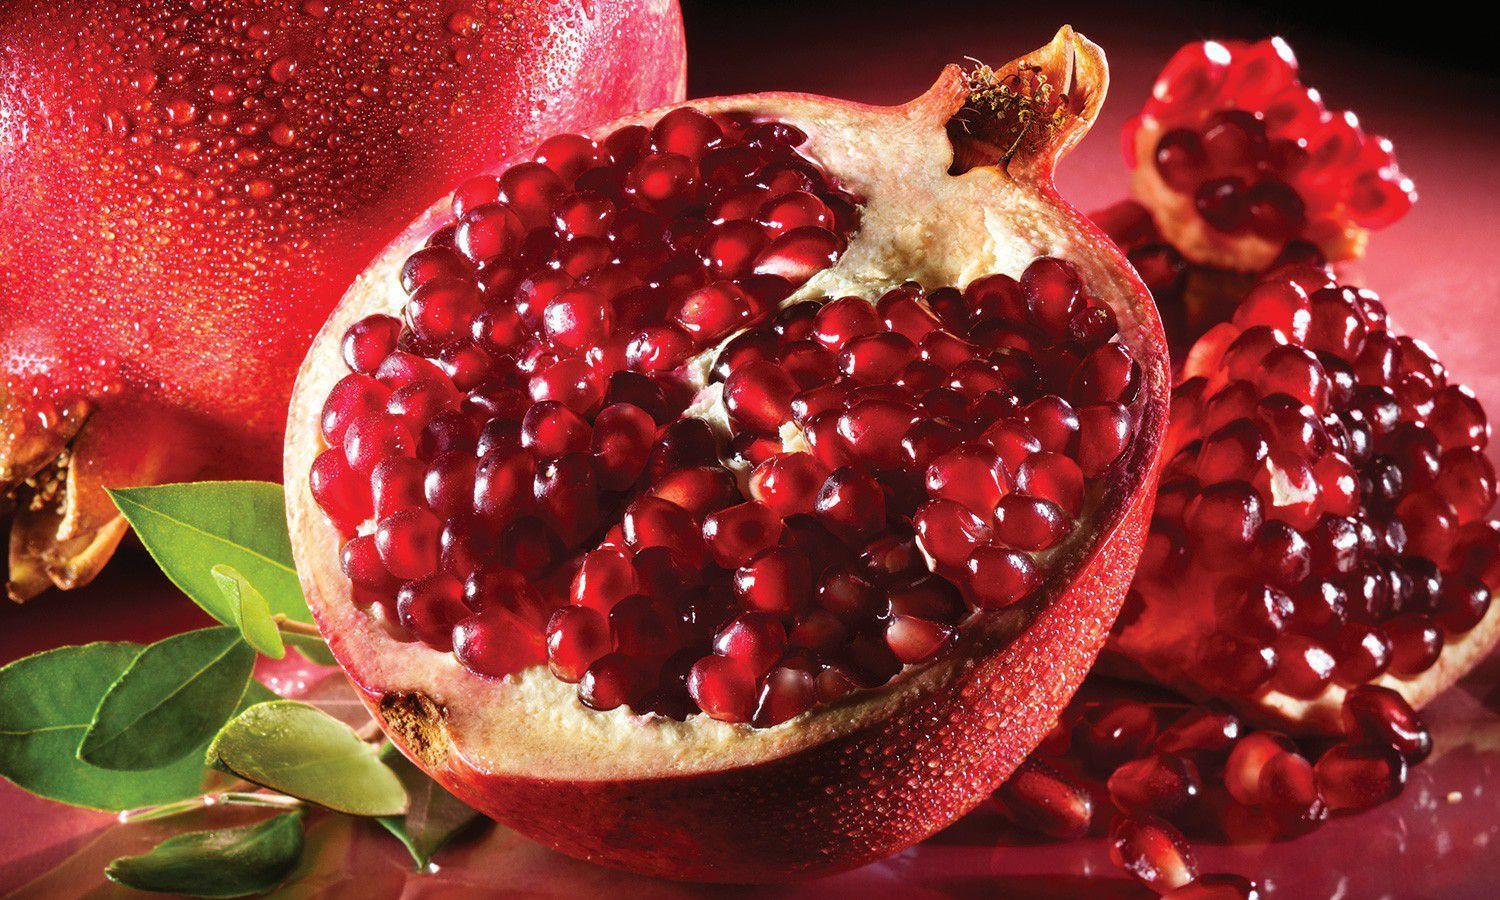 Pomegranate Photos Download The BEST Free Pomegranate Stock Photos  HD  Images